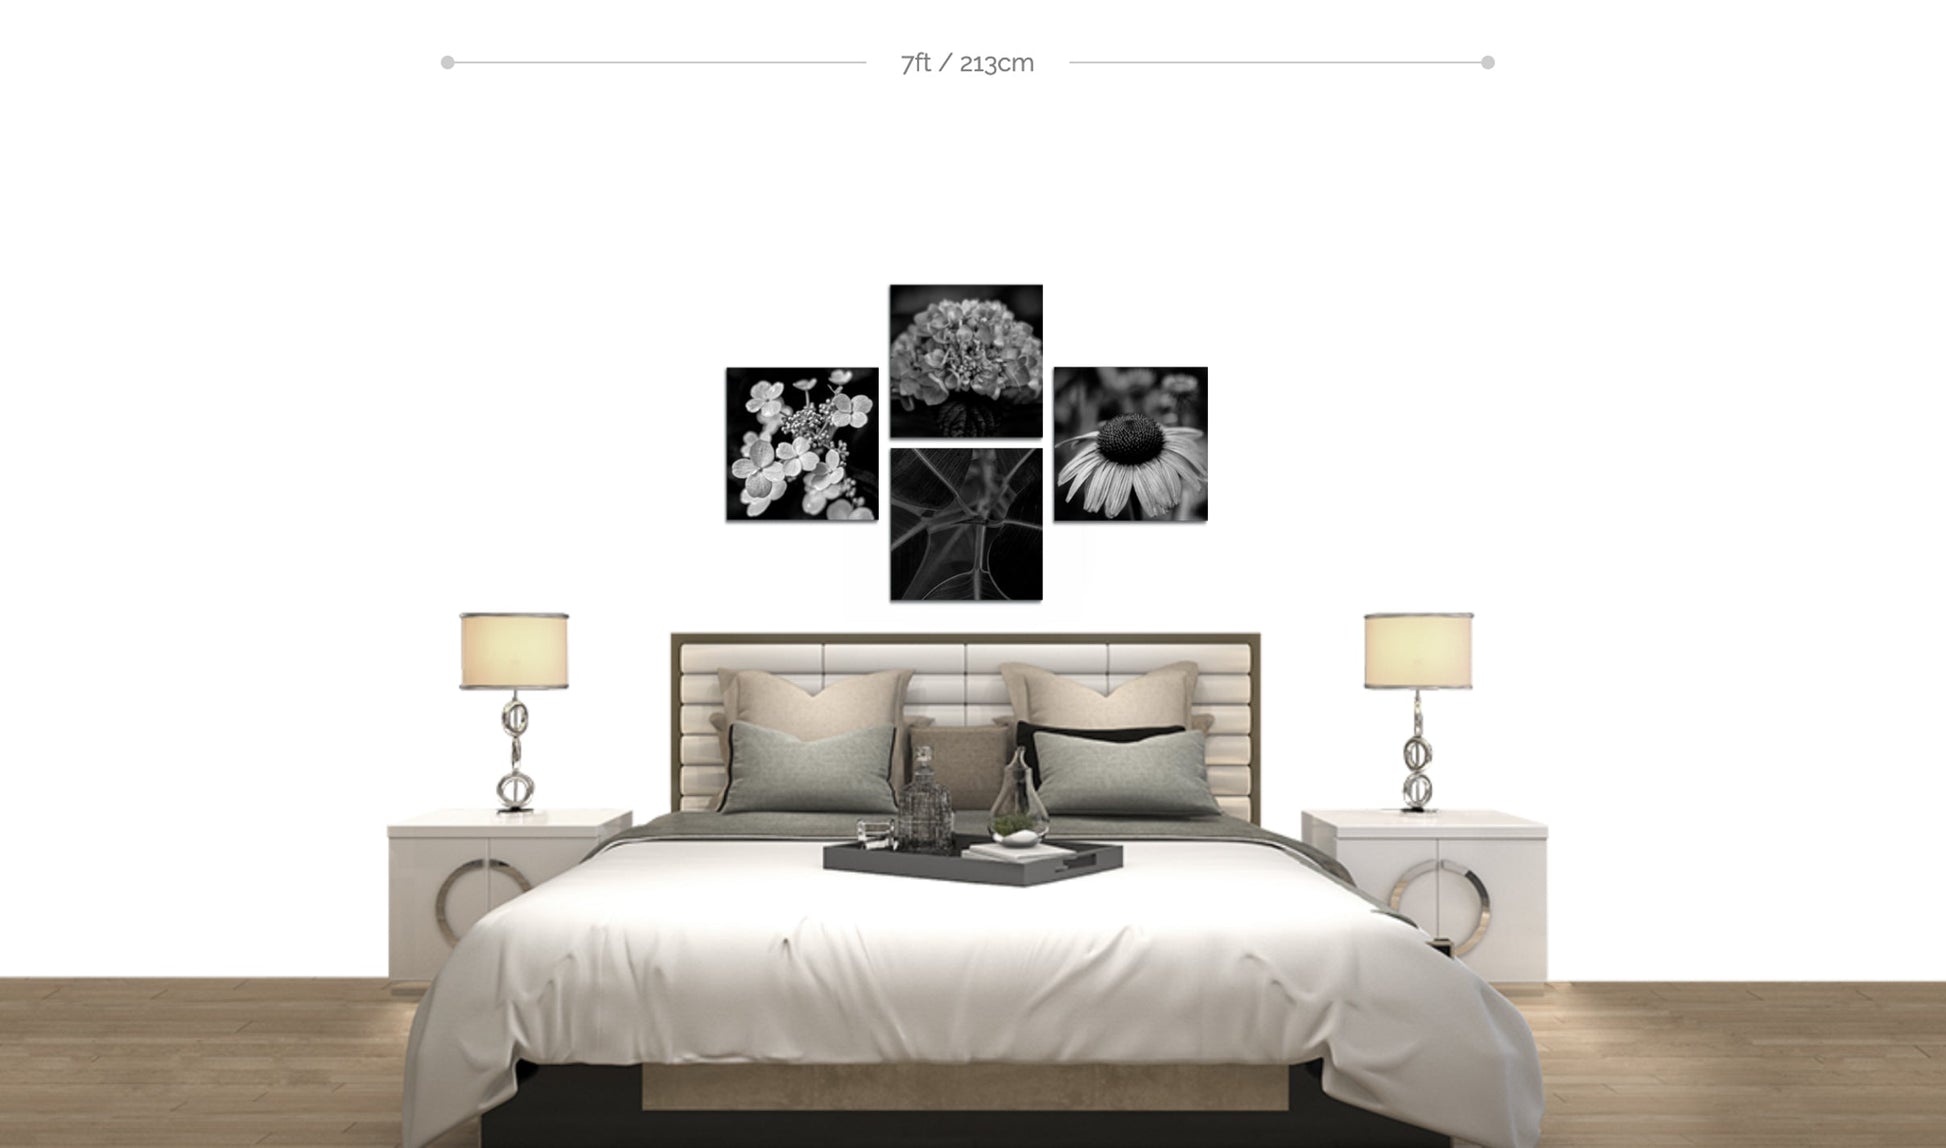 Flower wall art example four botanical metal prints on wall arranged in cross pattern above bed